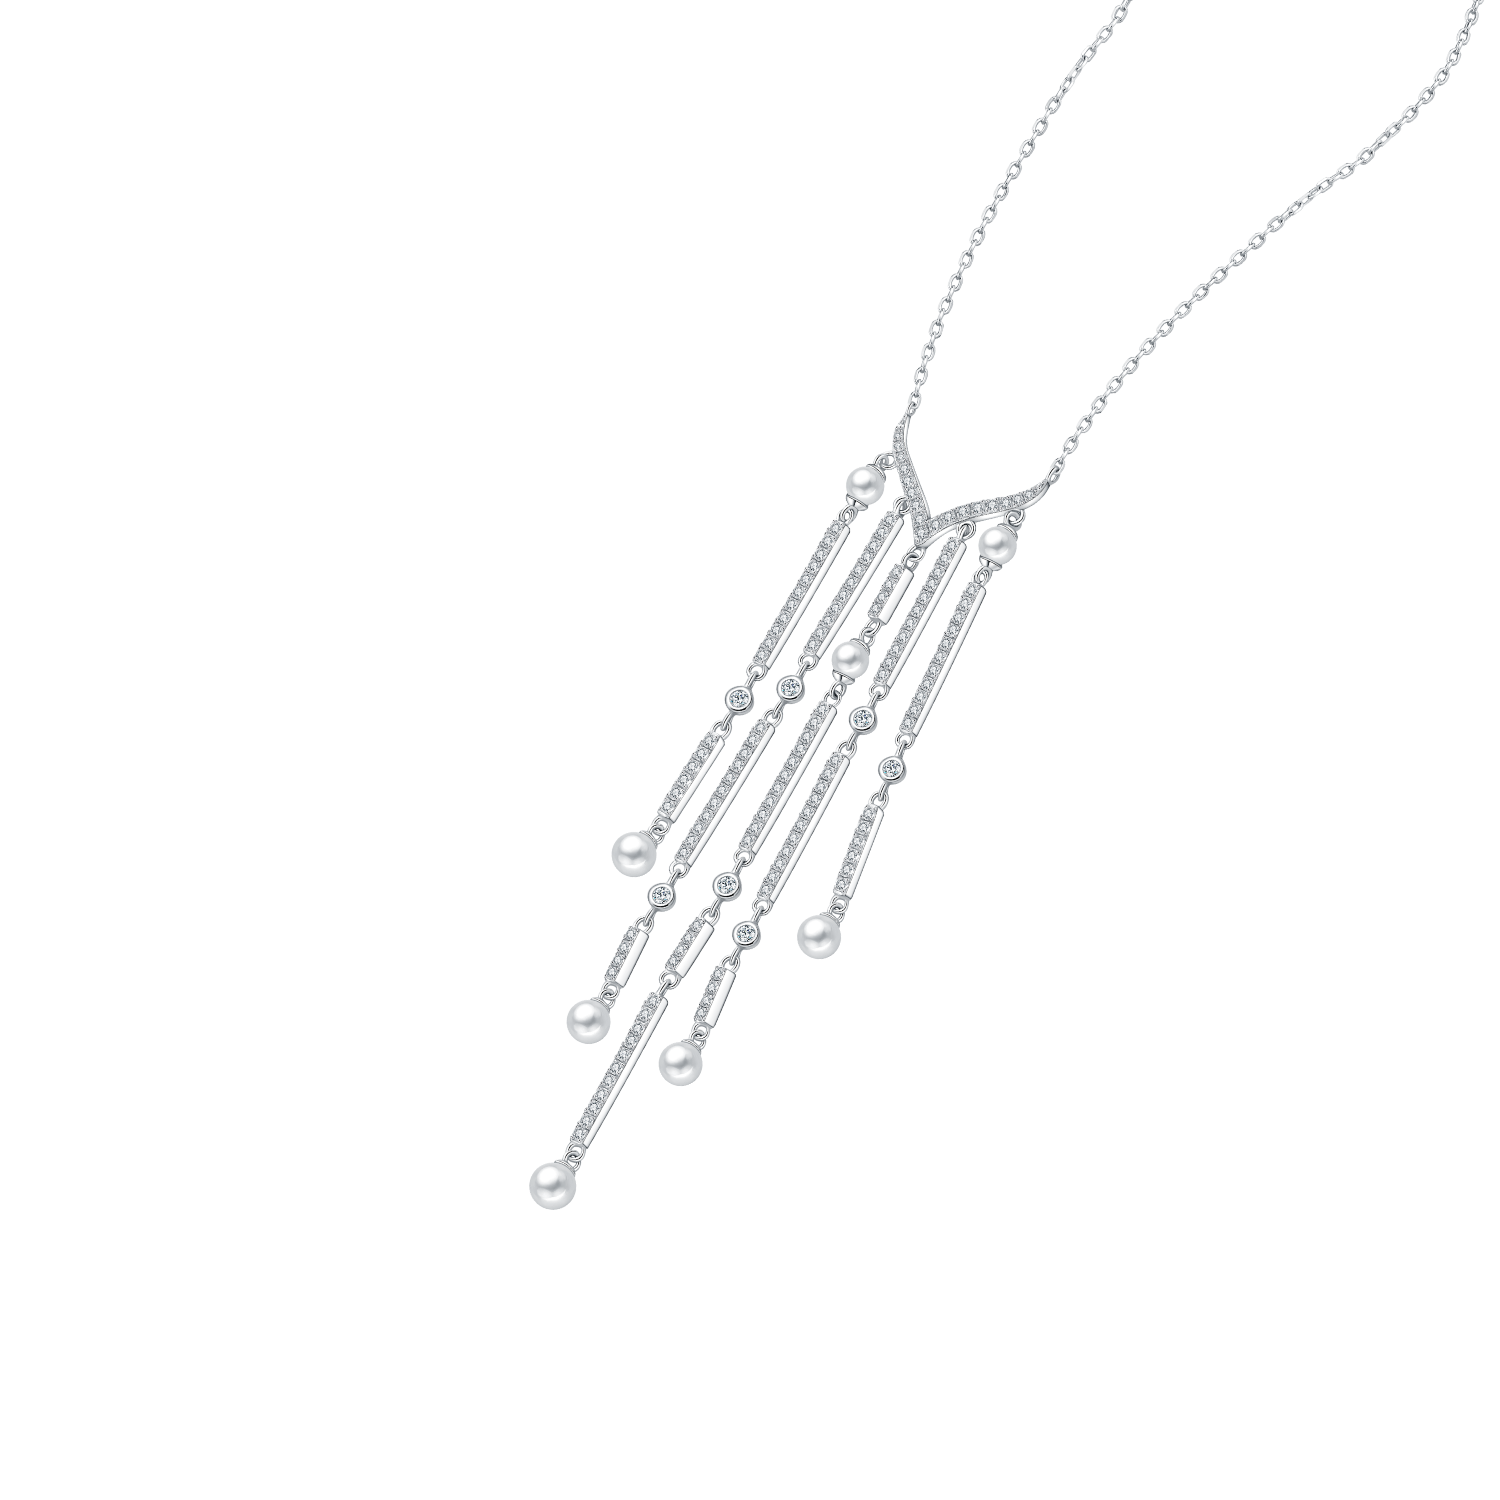 Waterfall Lariat Necklace